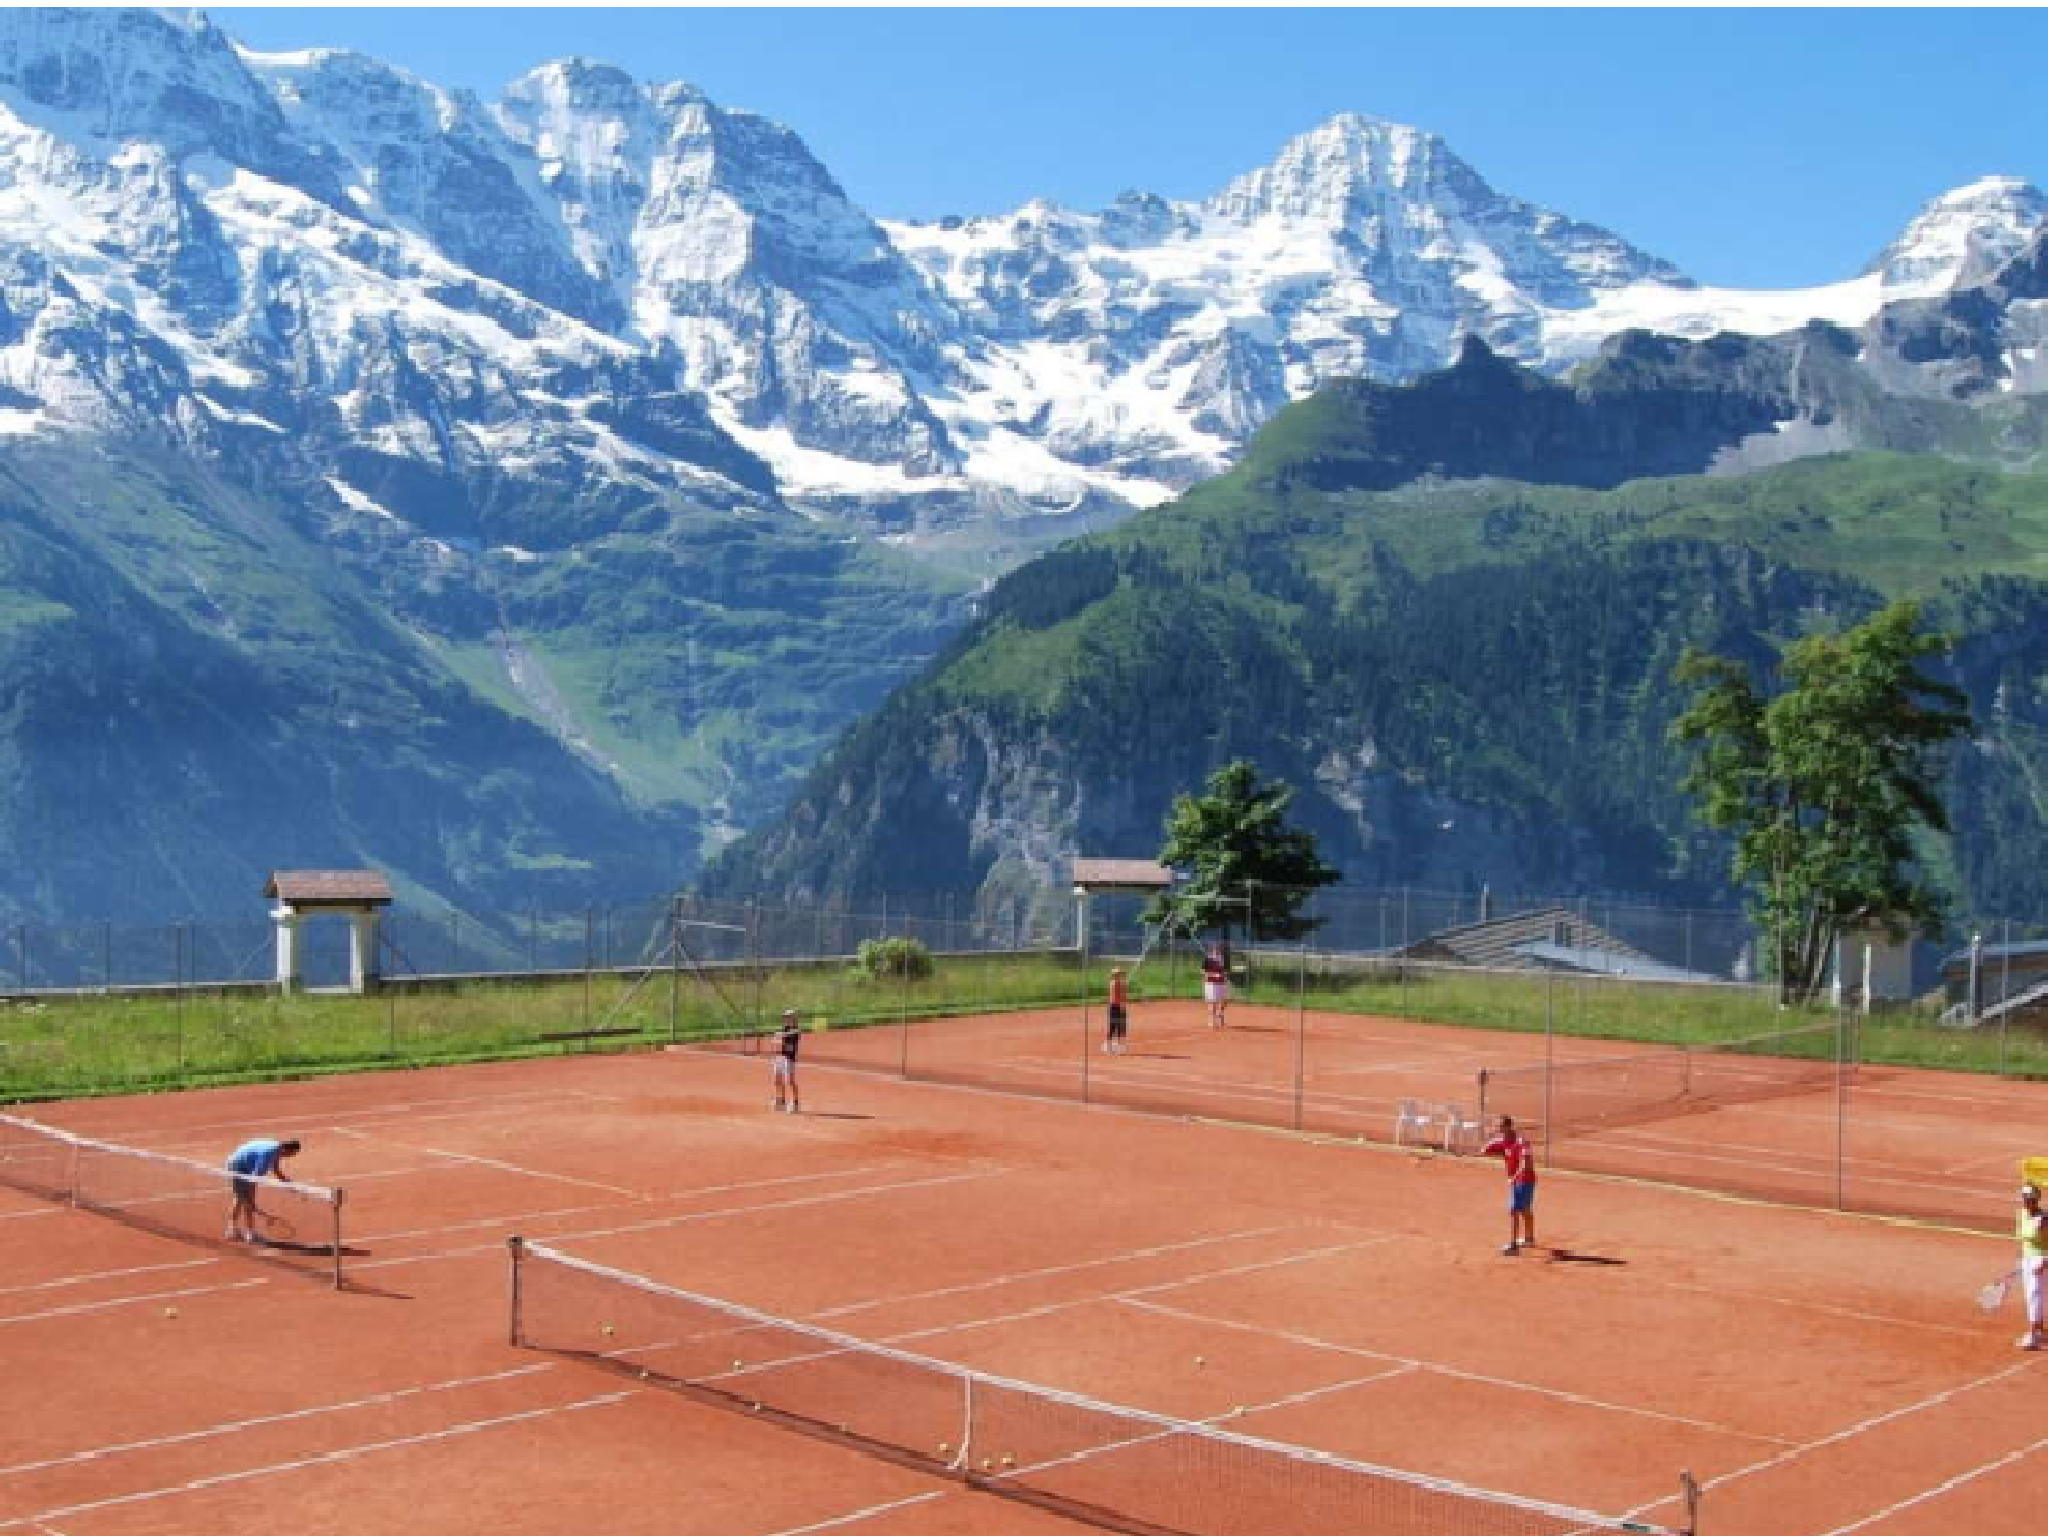 Sportchalet Murren’s courts are 1650m above sea level